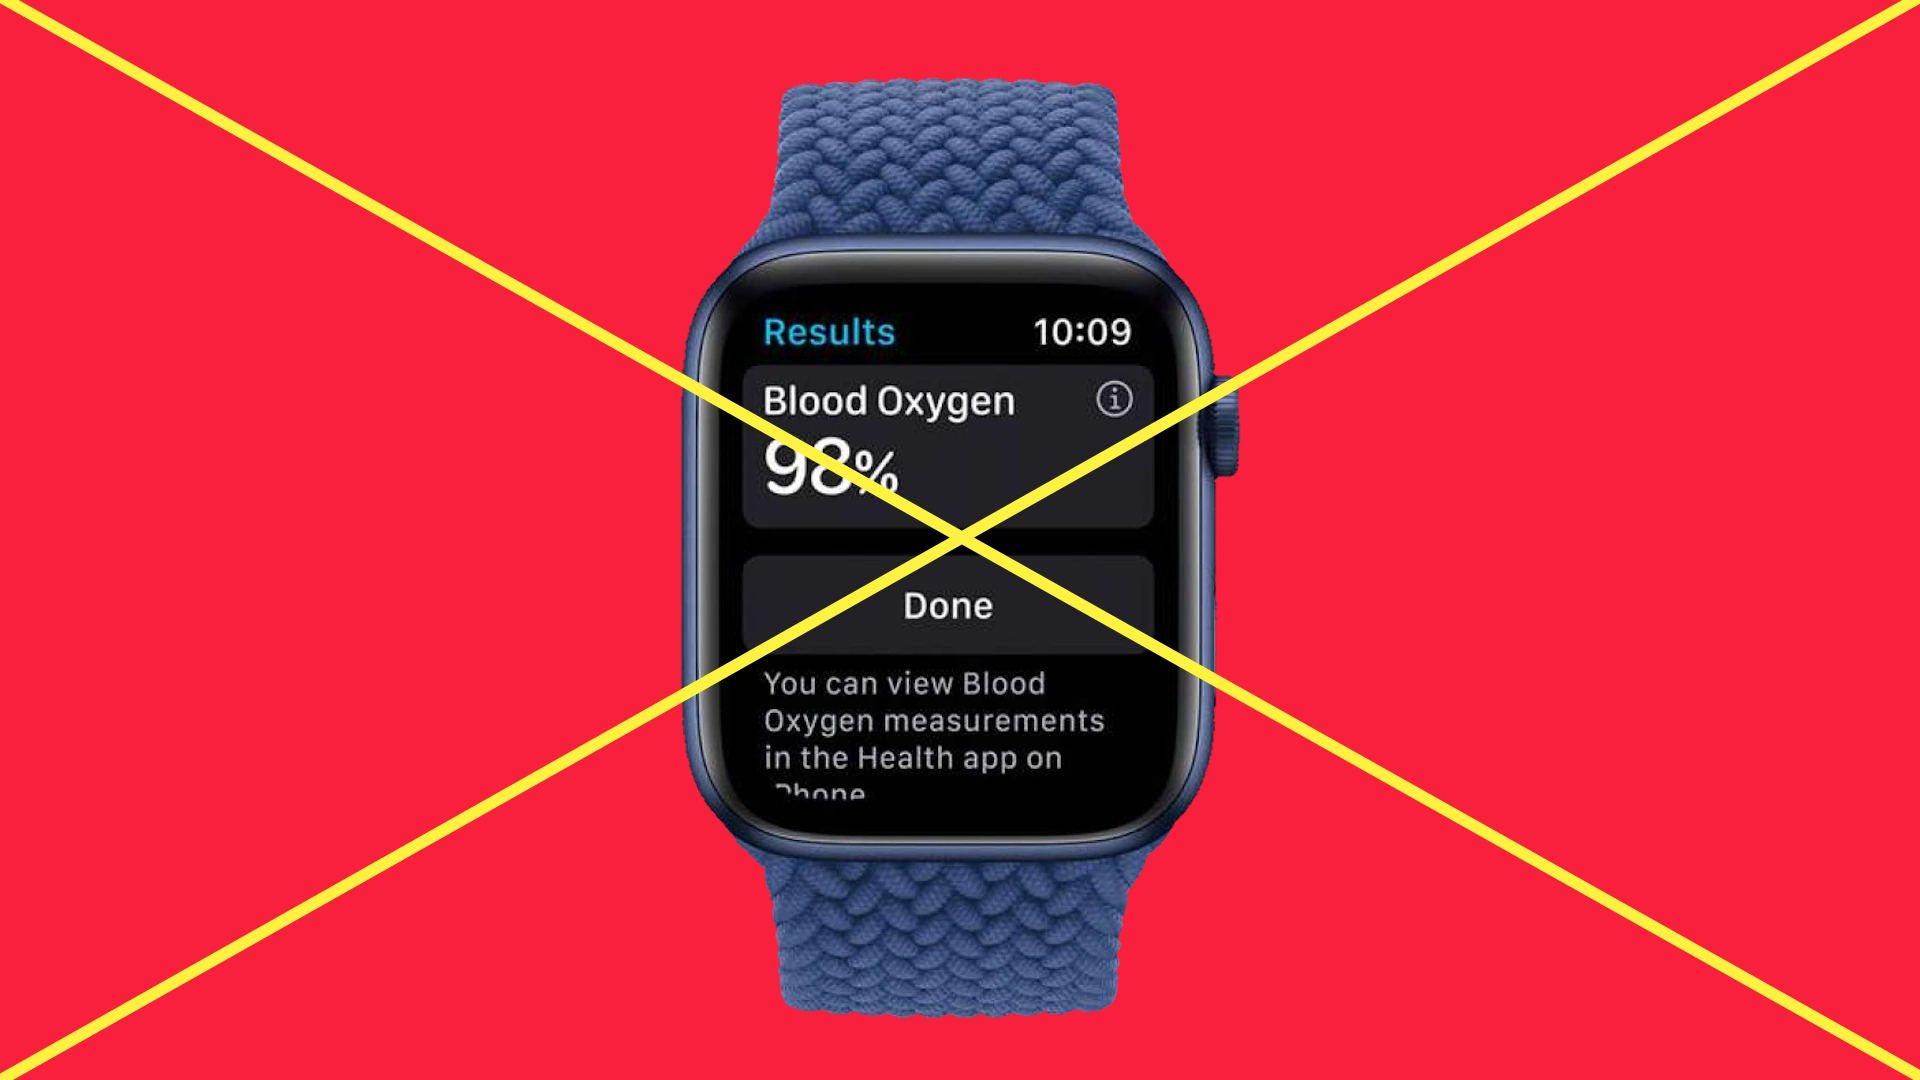 Apple is withdrawing the blood oxygen measurement function from the banned watches if the appeal to the court is unsuccessful